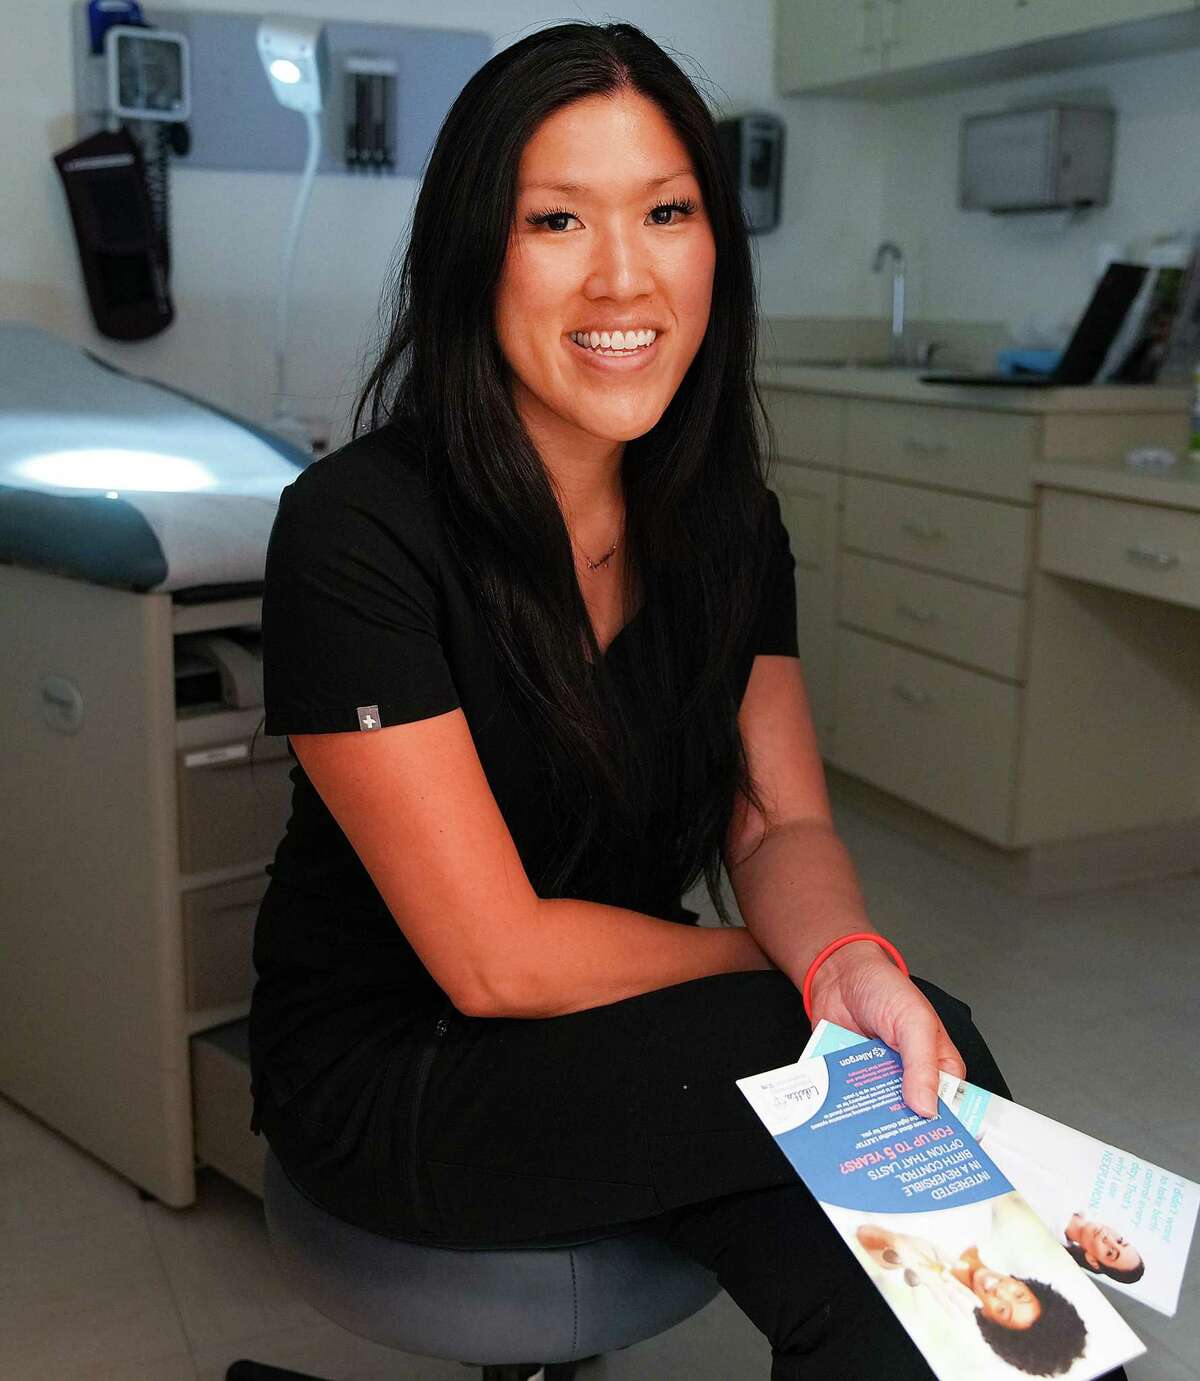 Dr. Vian Nguyen, an OB-GYN, at Legacy Community Health Clinic, holds some contraception pamphlets its clients have access too on Monday, July 11, 2022 in Houston.